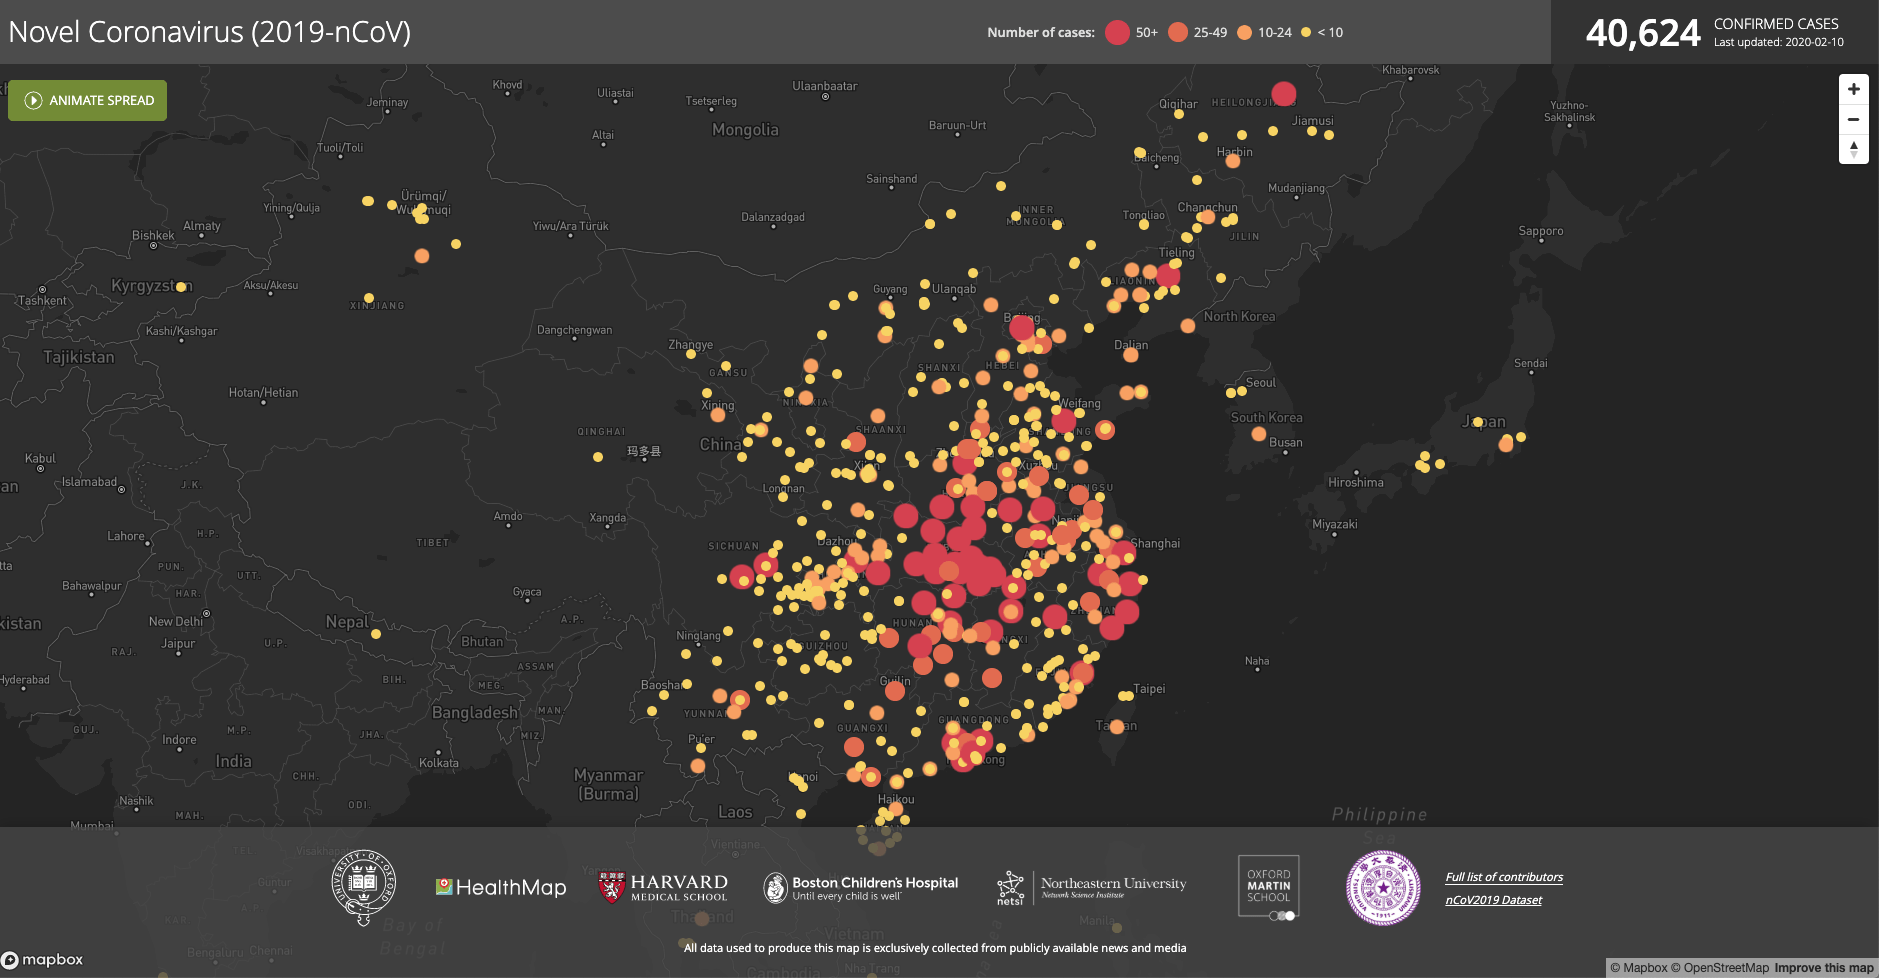 Healthmap's data visualization of 2019-nCoV's spread in China and east Asia as of February 10, 2020